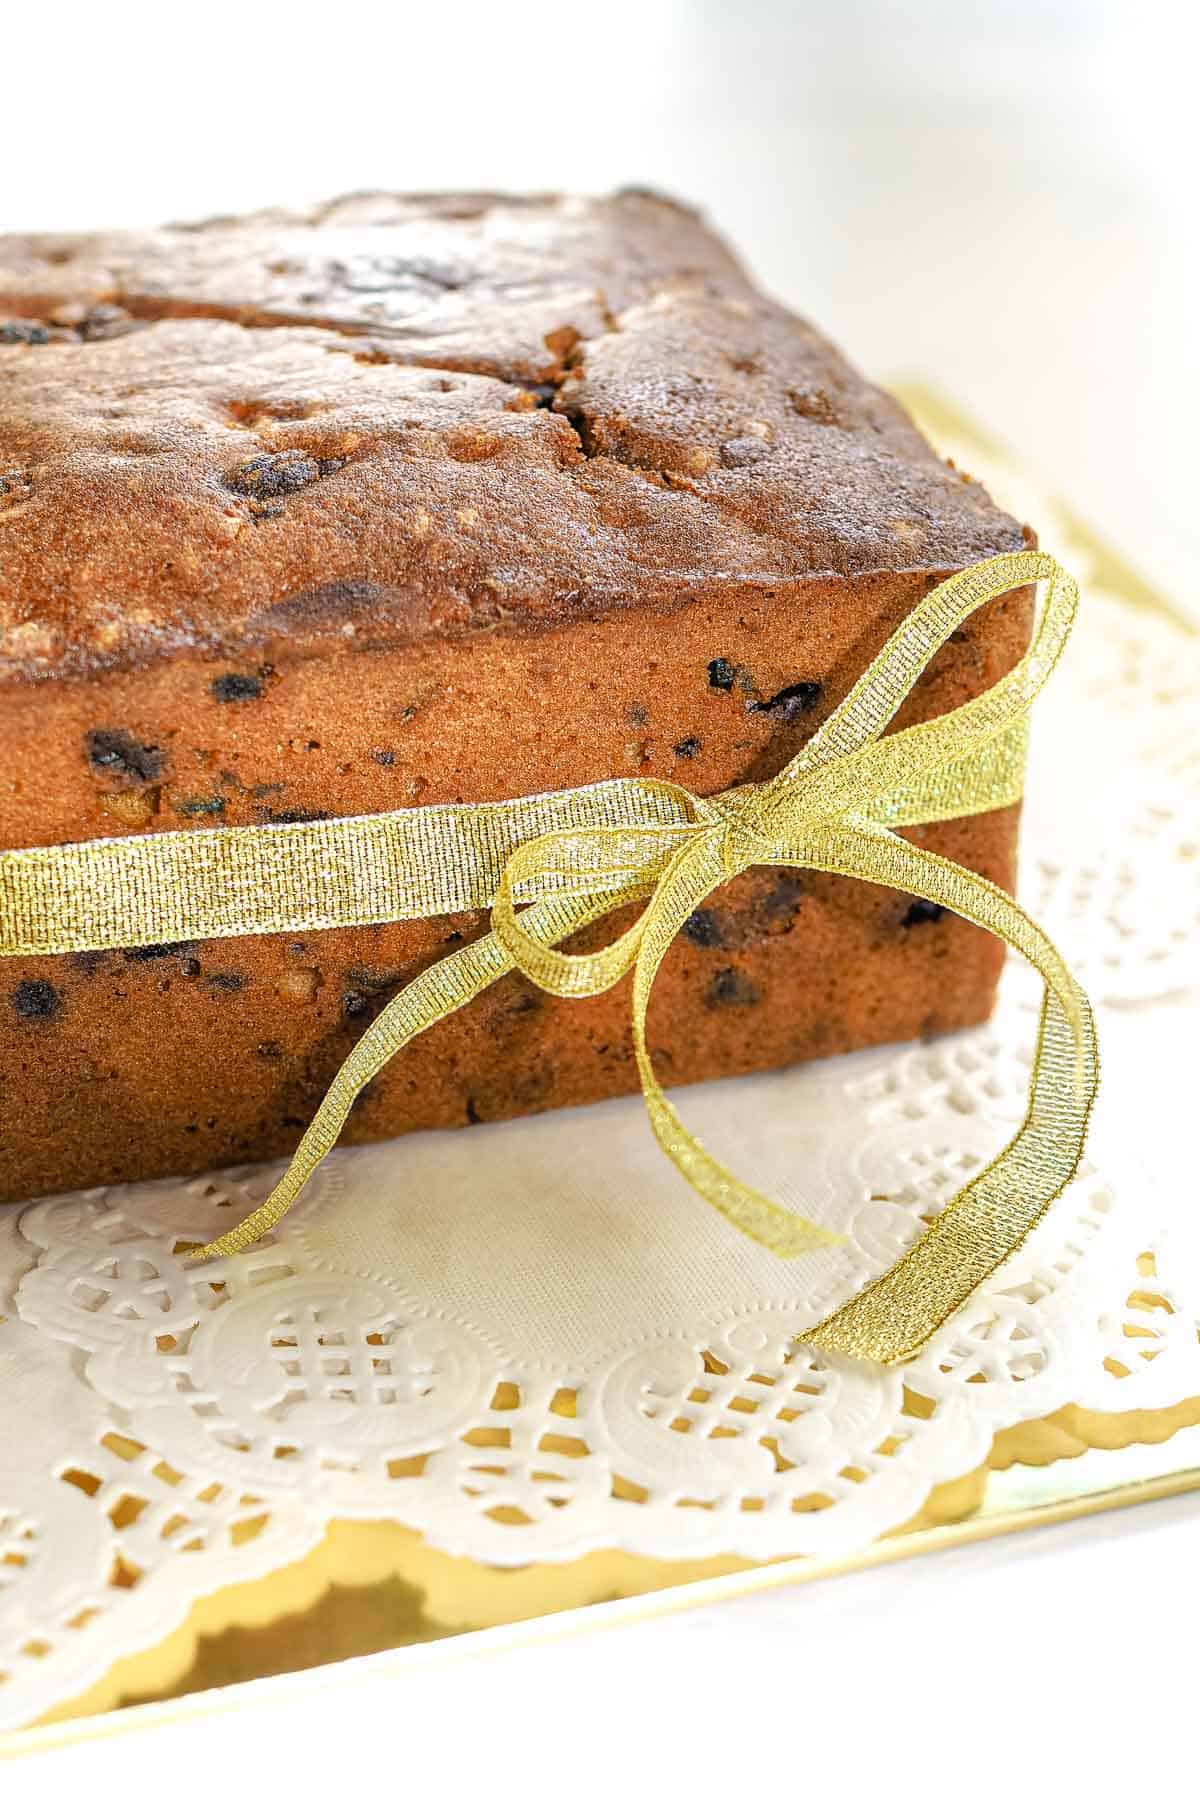 A tall fruit cake baked in a deep cake pan.